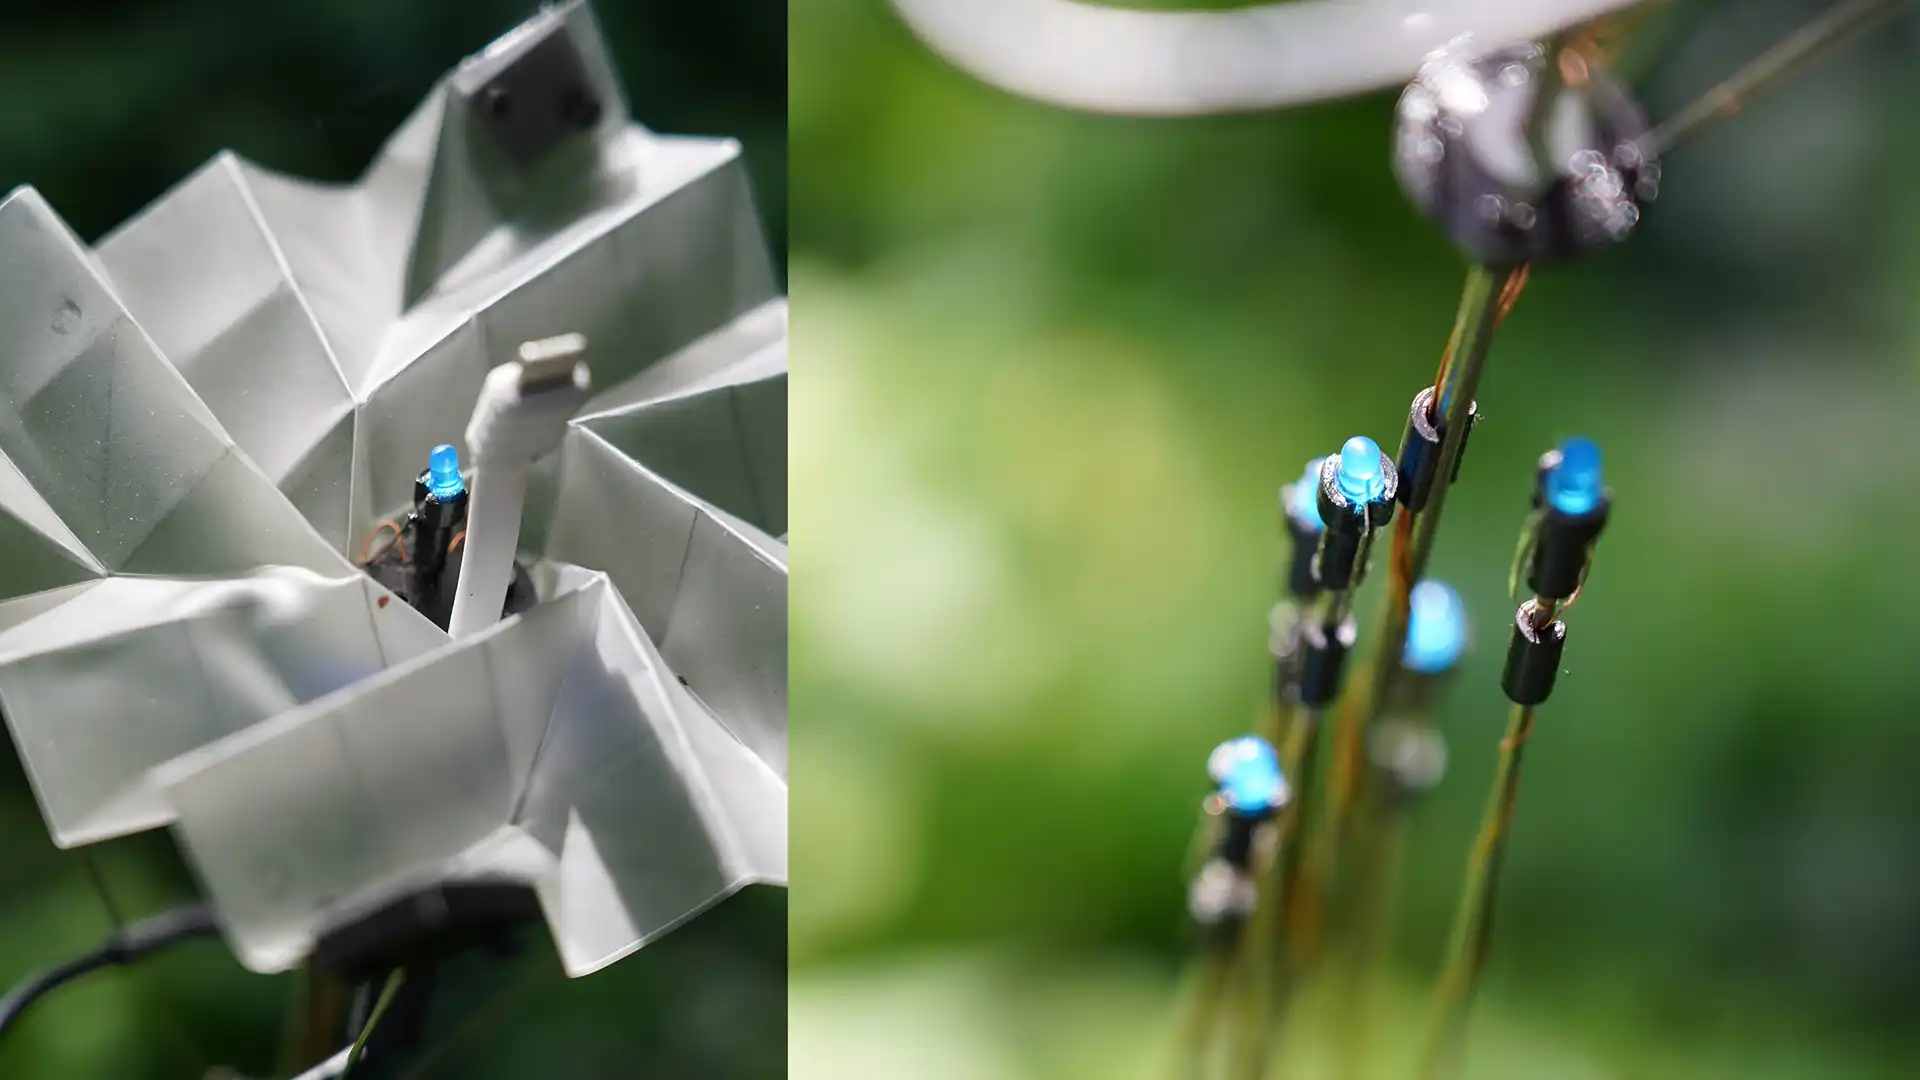 a two panel image showing details about the installation SYNANTROPHE. The left panel is a close up of the blossom, showing an intricite origami like folded sheet of slightly translucent pvc. there is a led in the middle of it and a charging cable coming out of it. The right panel is showing another perspective of the leds and the blossom from slightly above.